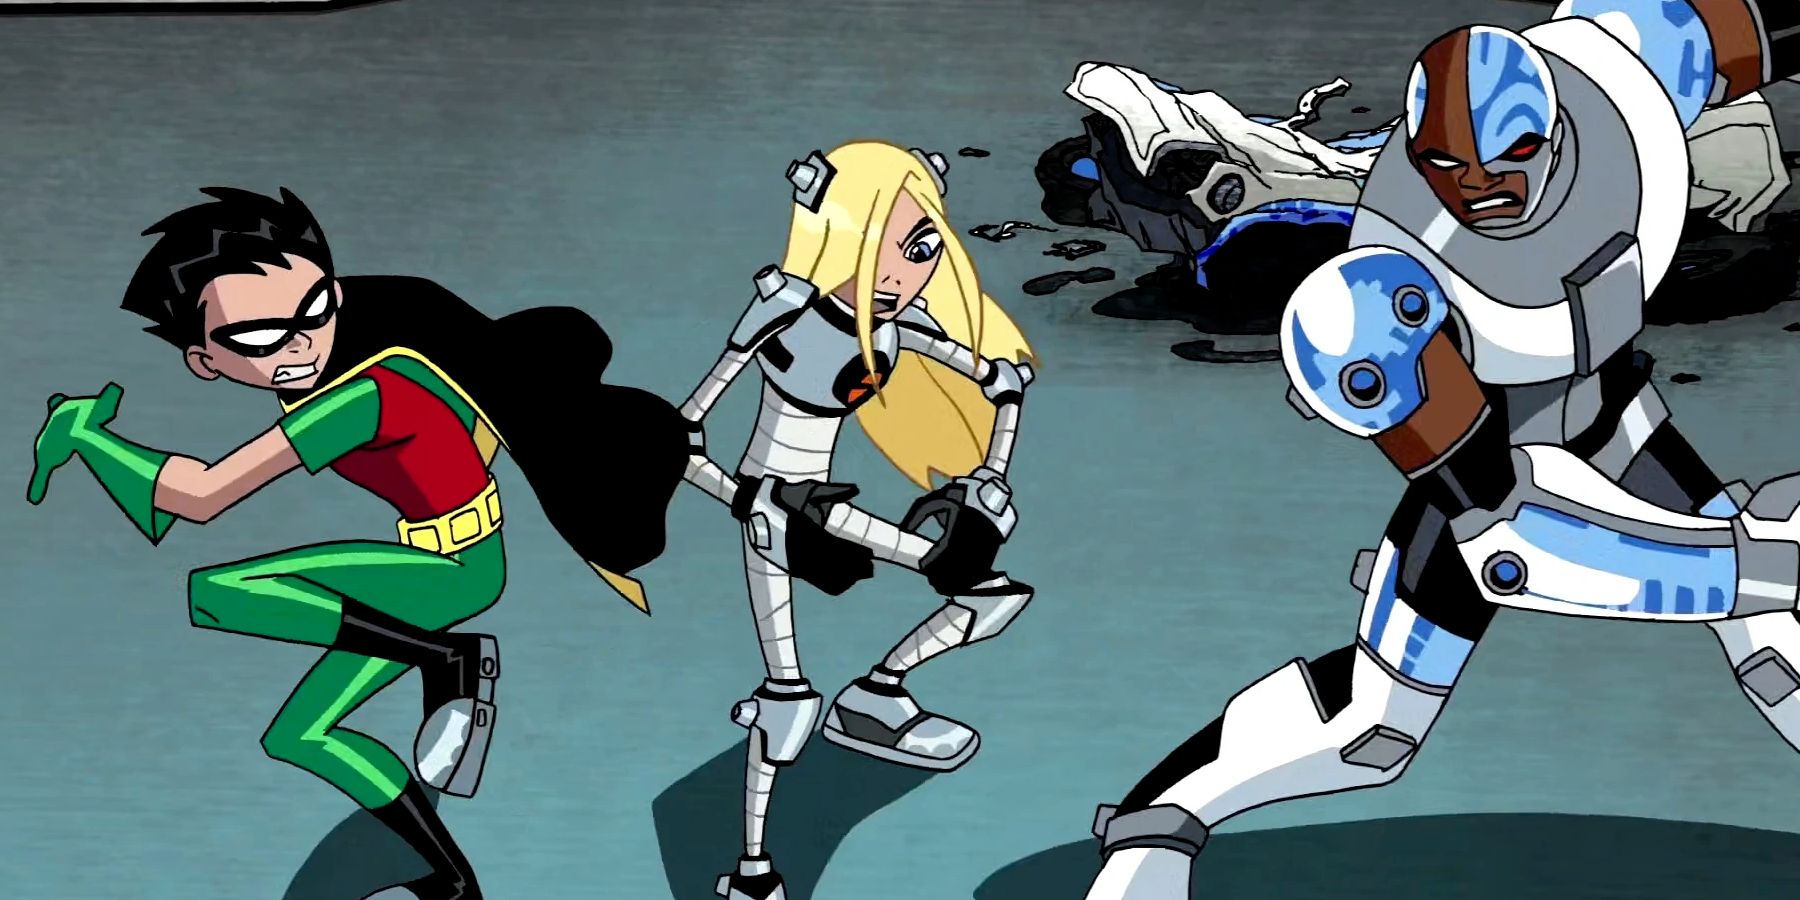 Terra fights Robin and Cyborg in Teen Titans